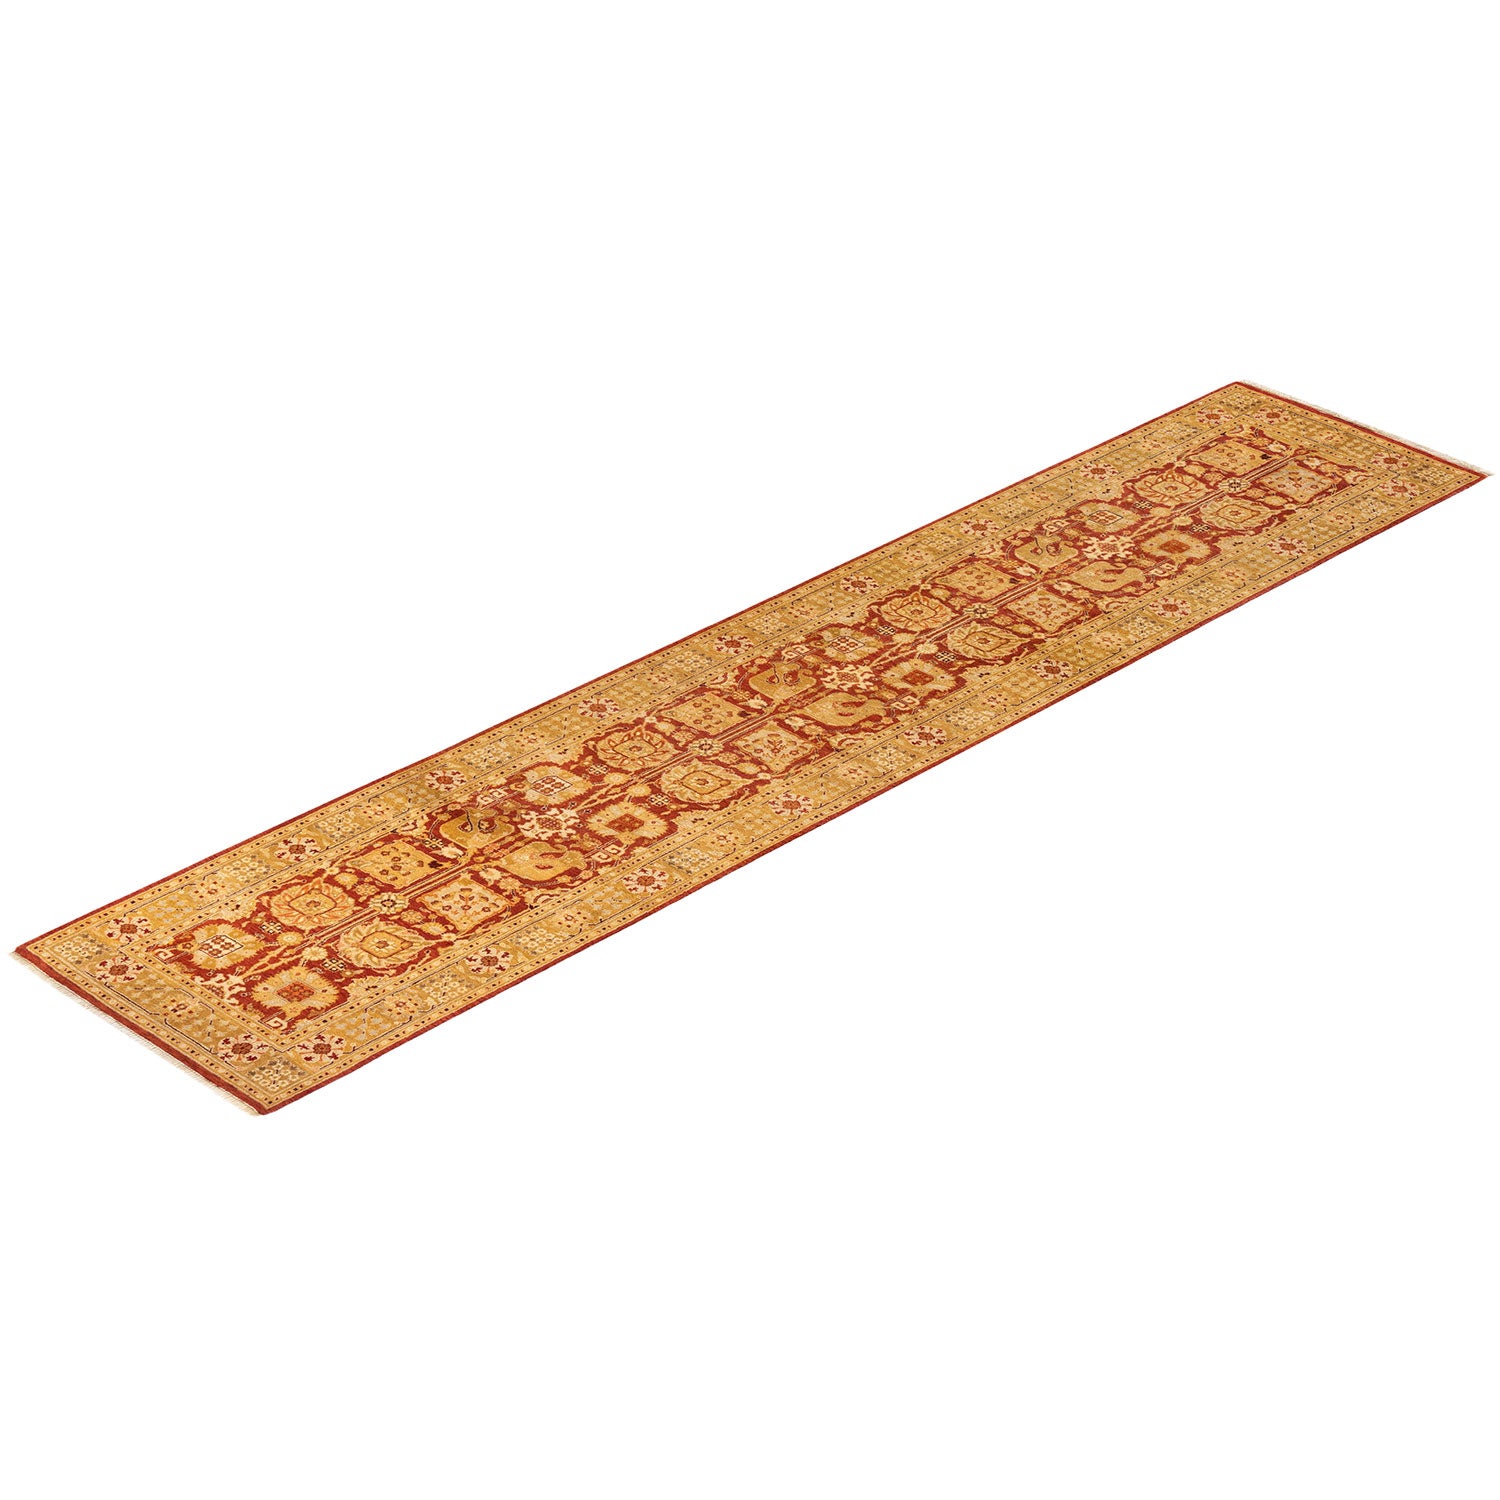 Highly decorative, traditional carpet with repeating medallion motifs in warm colors.